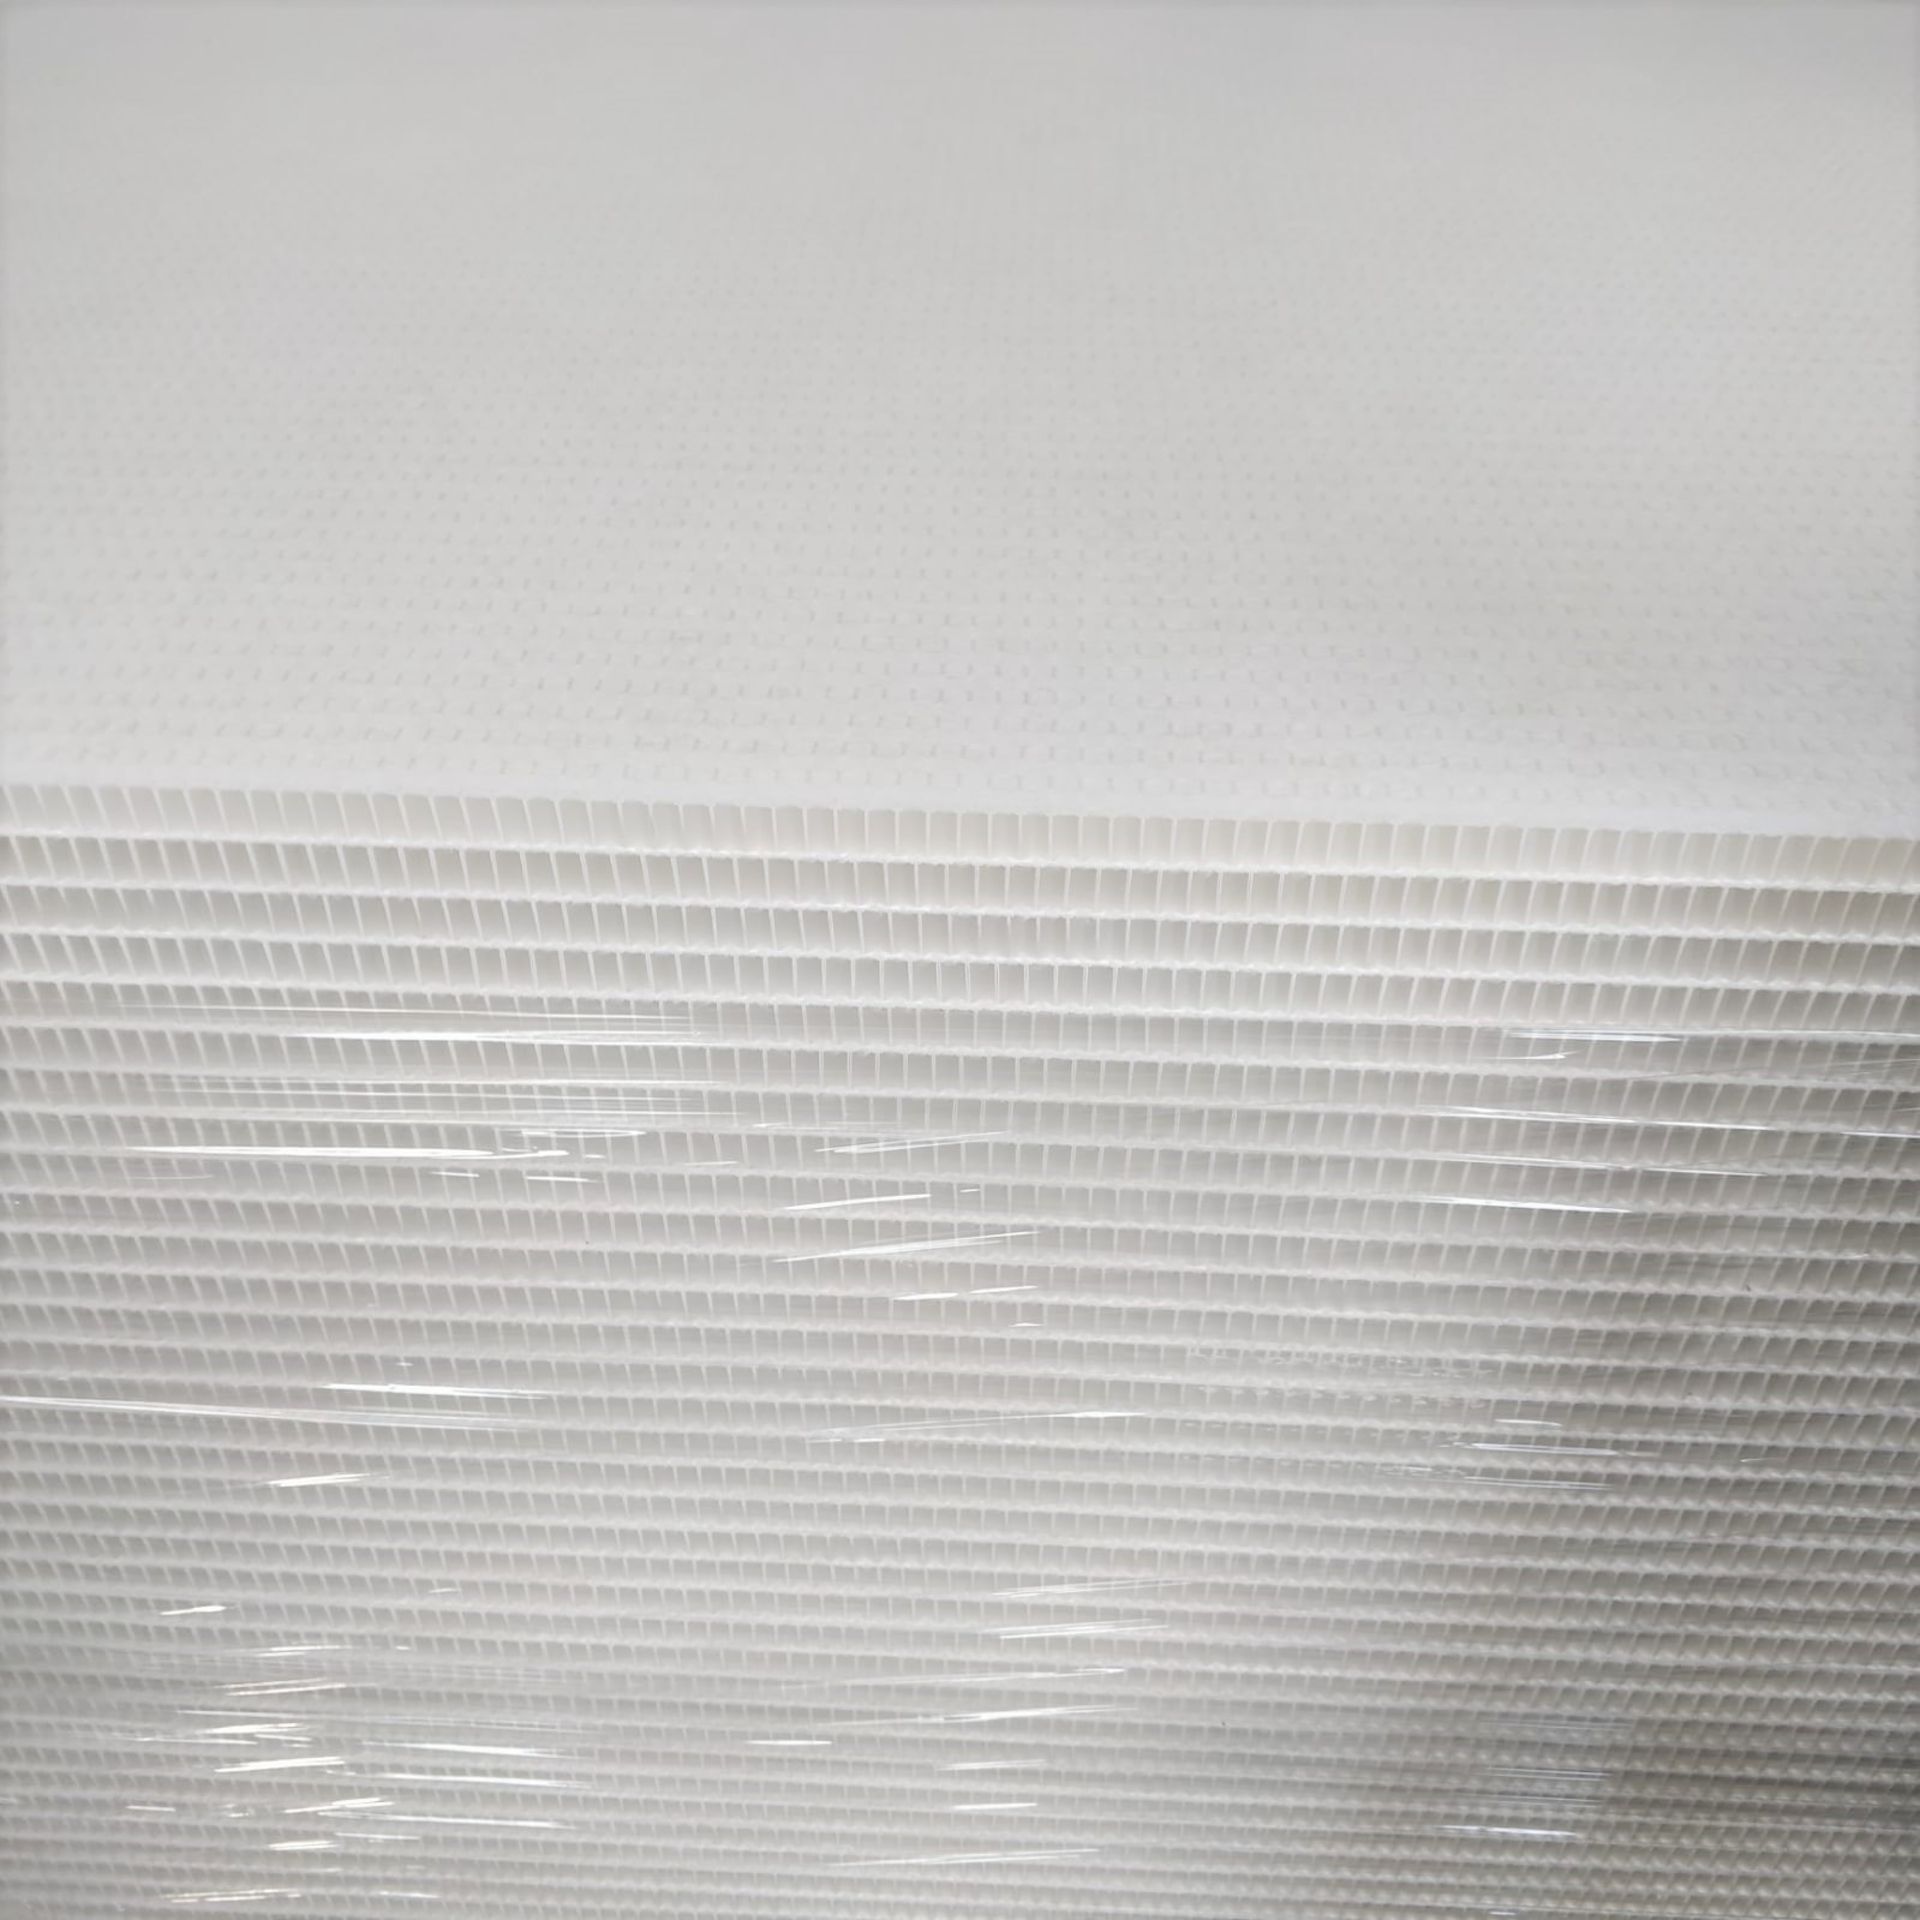 100 x ThermHex Thermoplastic Honeycomb Core Panels - Size: 693 x 1210 x 20mm - New Stock - - Image 2 of 7